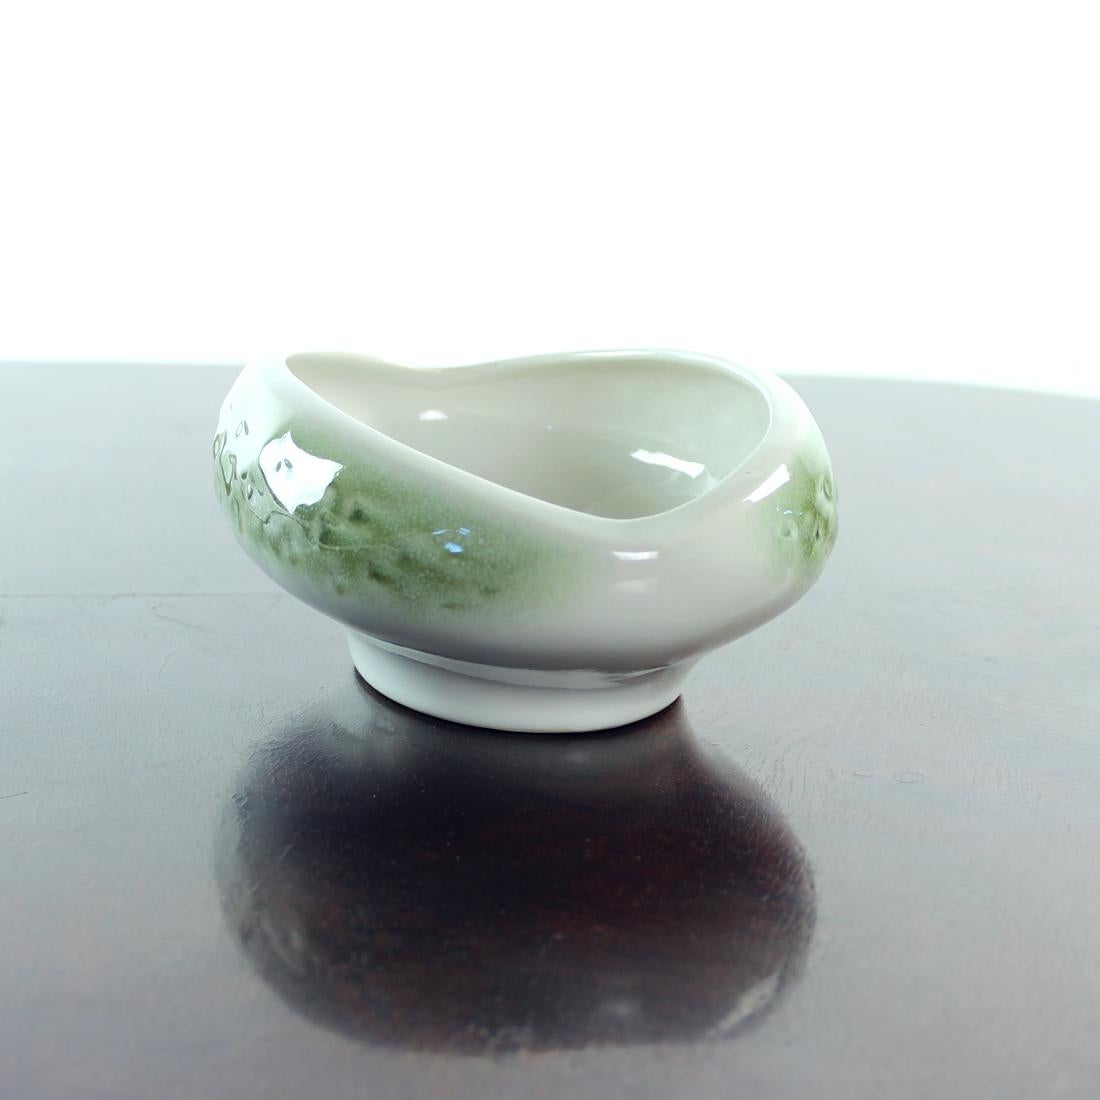 Beautiful, elegant and hard to miss. This ceramic bowl is made with beautiful details. Produced in Czechoslovakia in 1960s, original label on the bottom, printed in glaze. The bowl is made of a white porcelain with green pattern on each side.